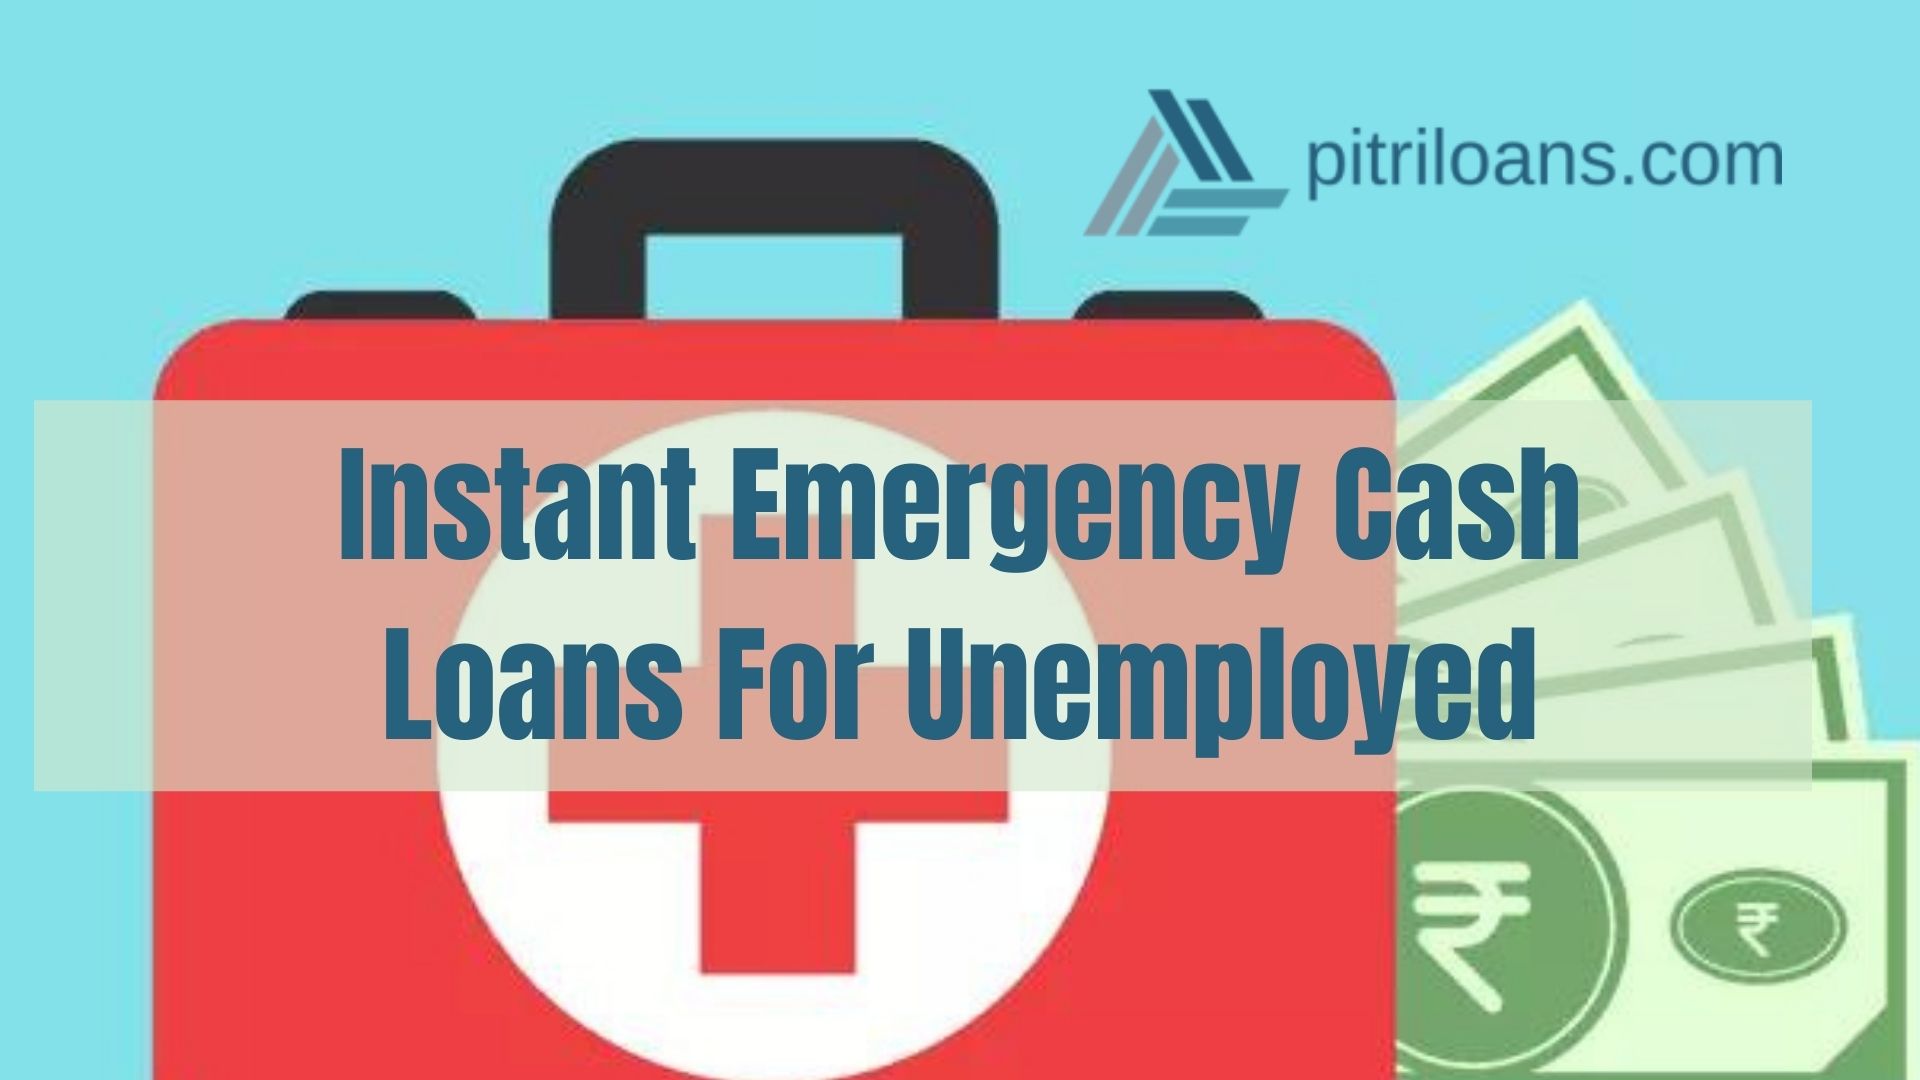 Instant Emergency Cash Loans For Unemployed